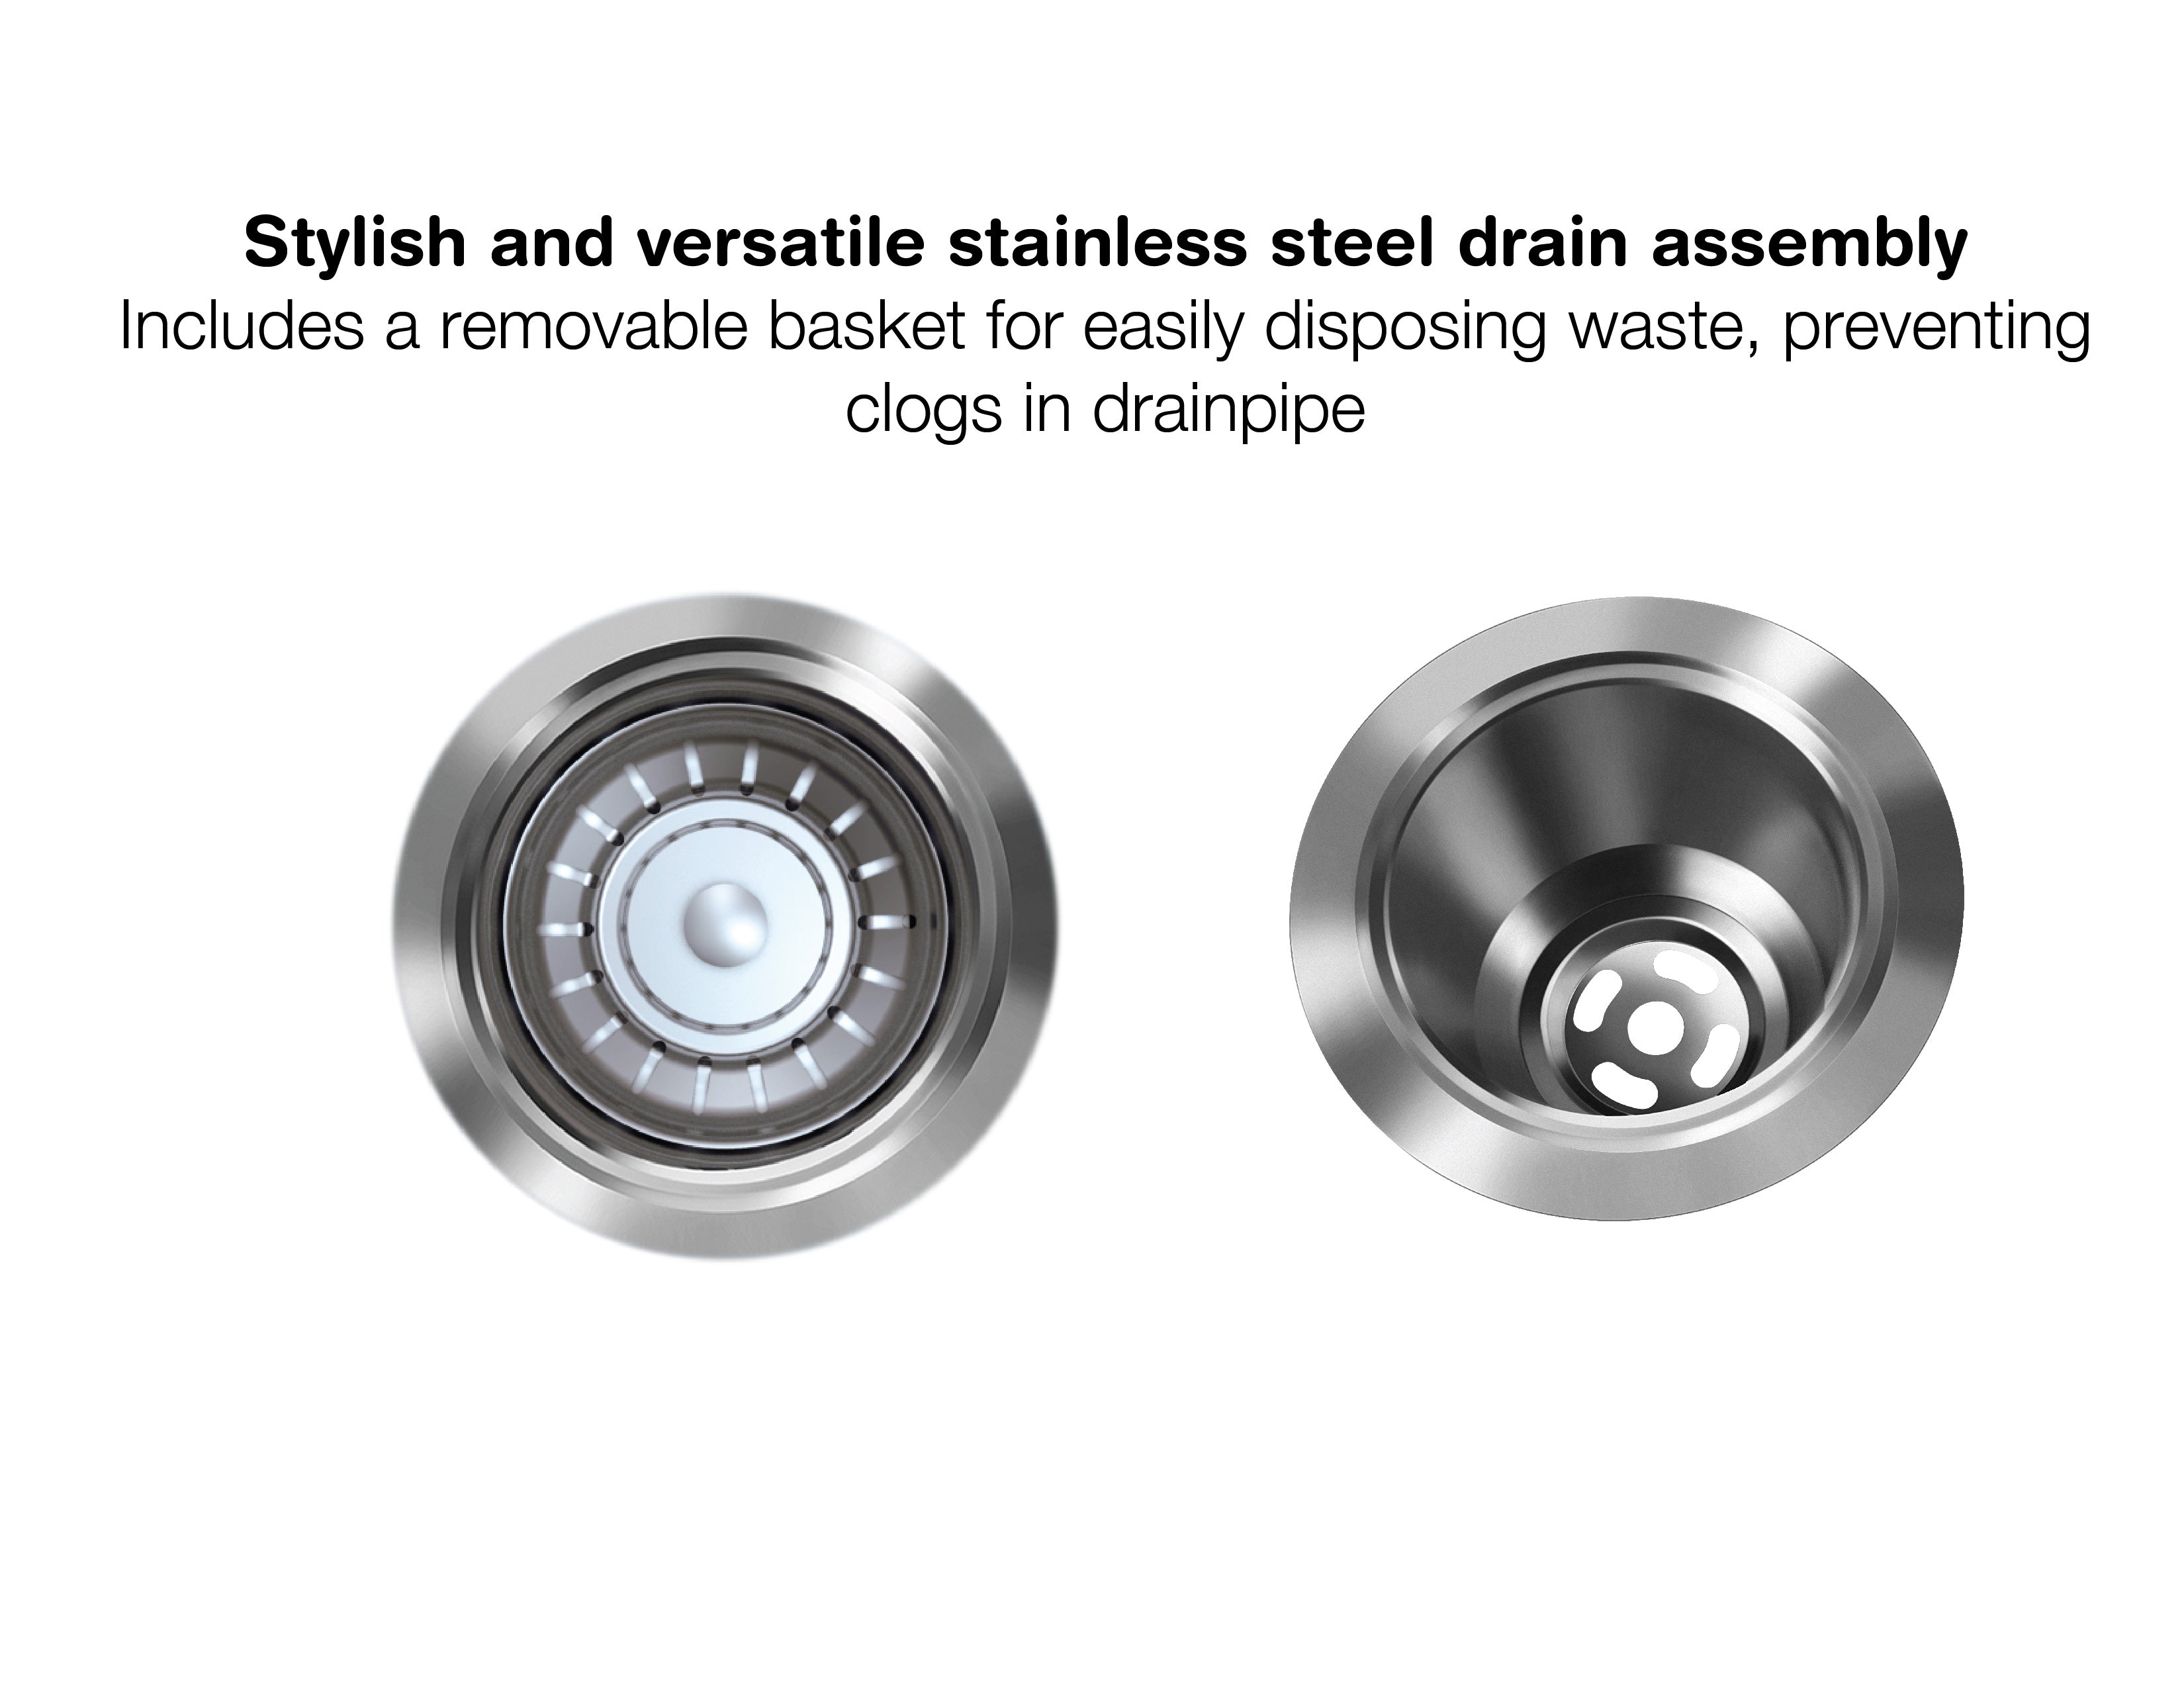 Capri Series Undermount Stainless Steel 32 in. 50/50 Double Bowl Kitchen Sink in Satin Finish with Grid and Strainers